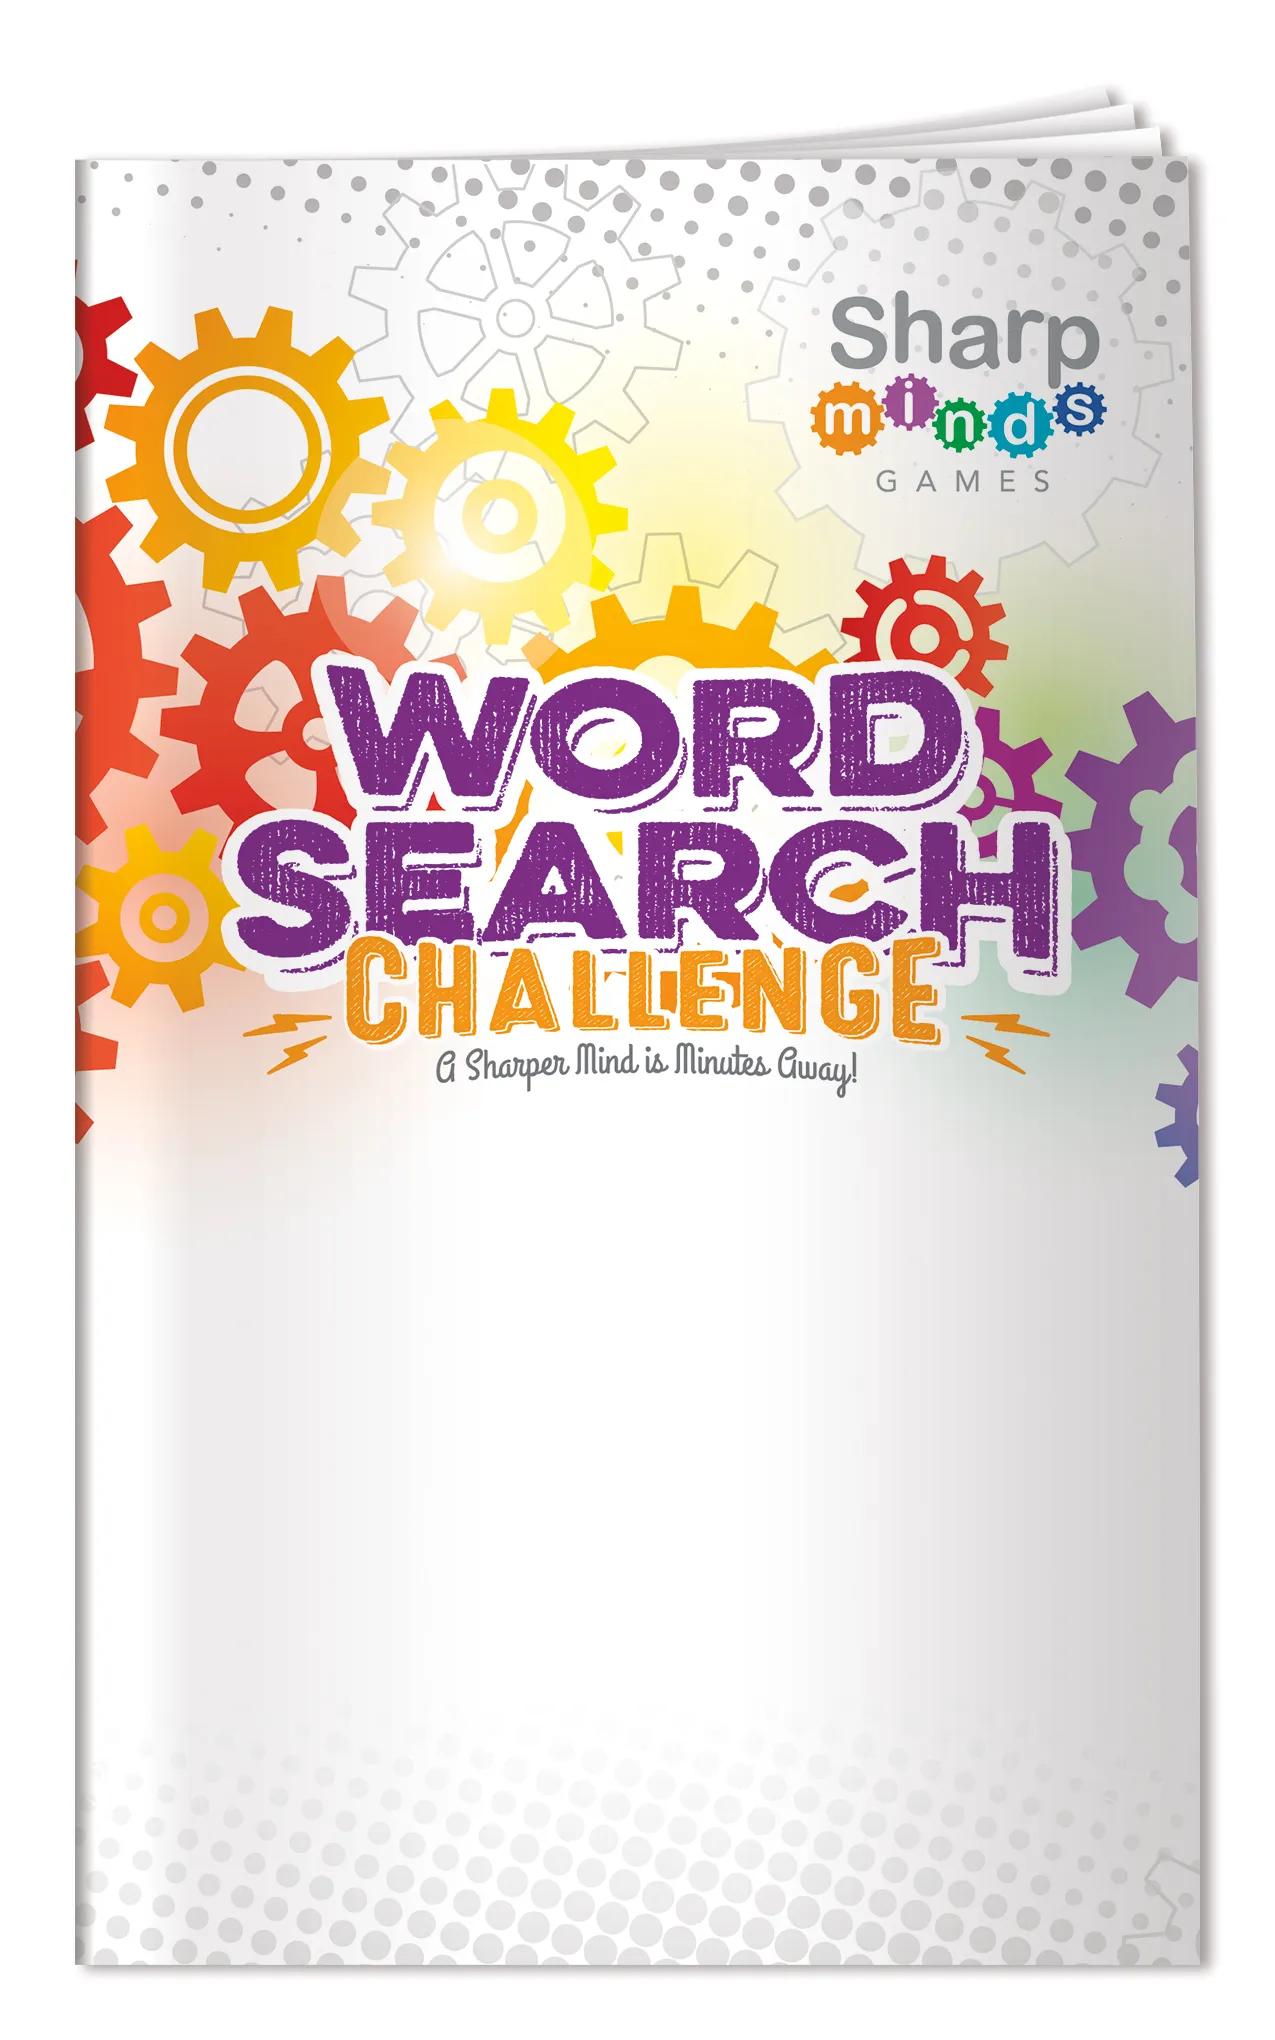 Sharp Minds Games: Word Searches Challenge 2 of 8